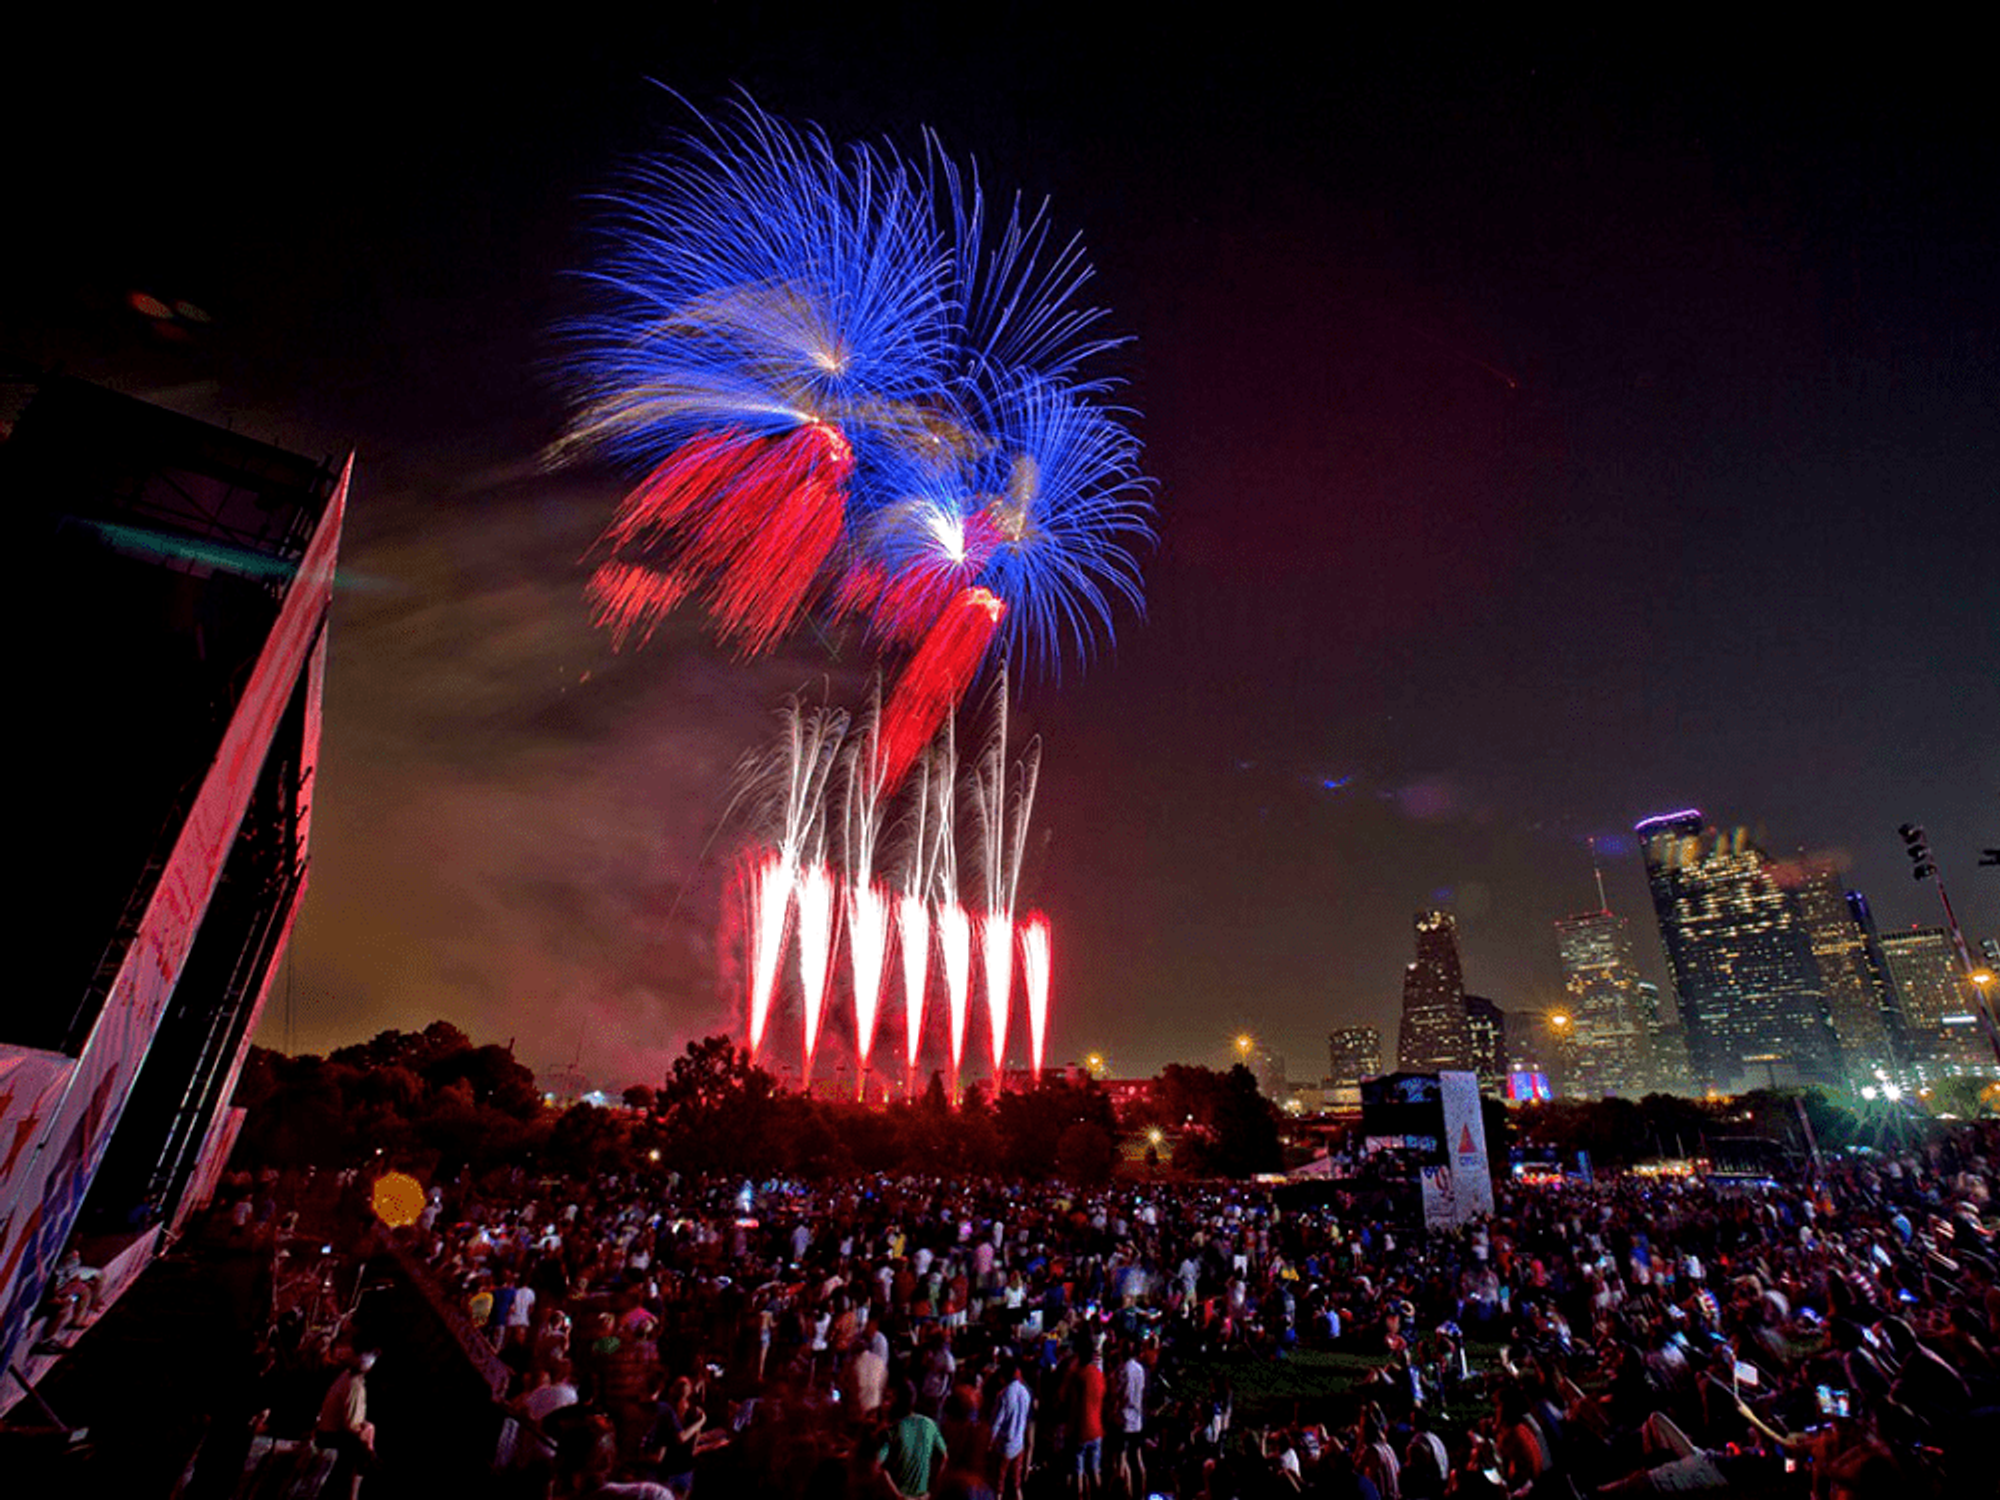 Want a better seat for the fireworks? There's an app for that.